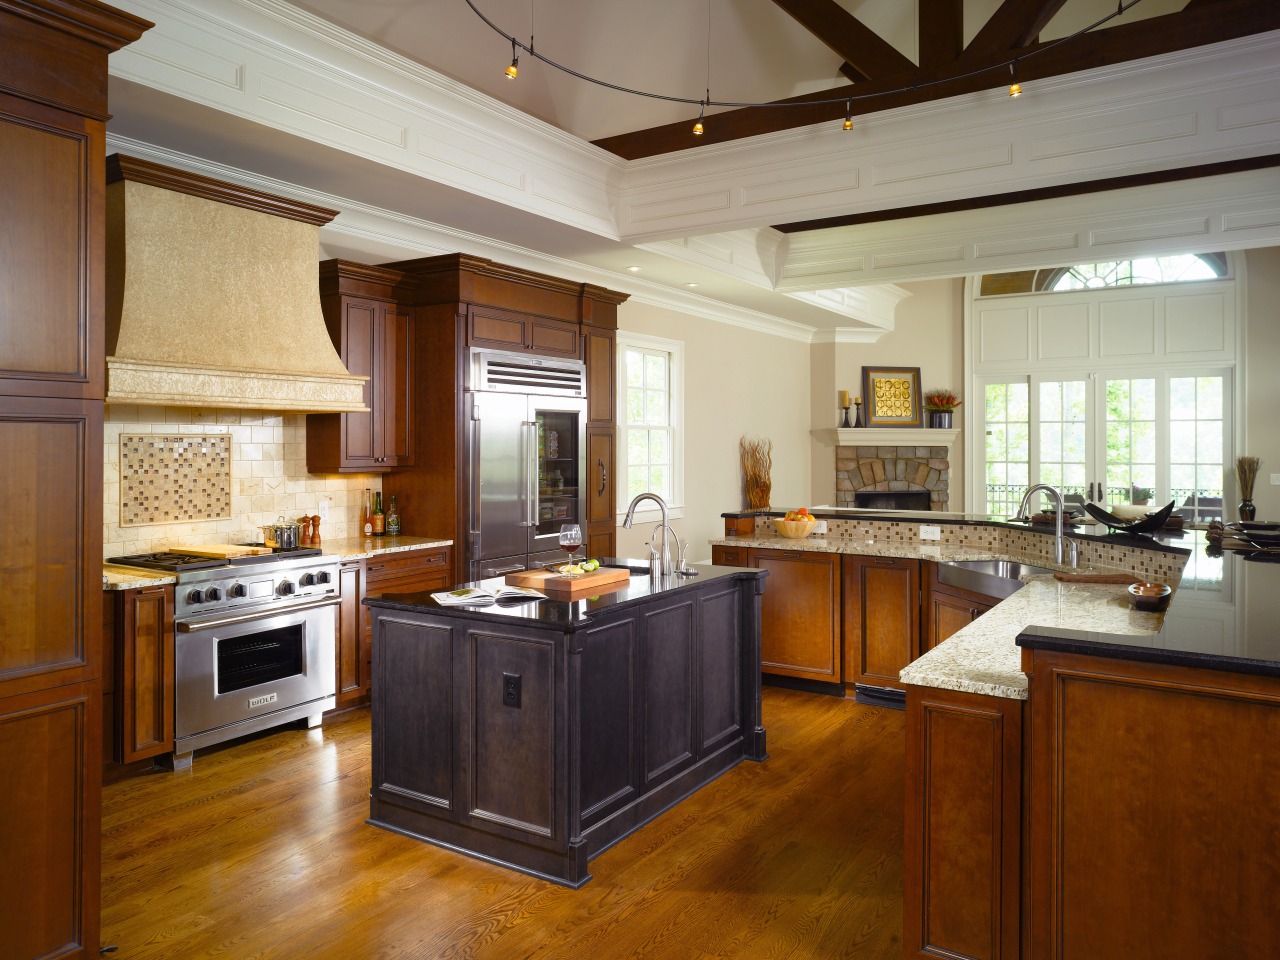 Different wood and granite types visually draw the cabinetry, ceiling, countertop, cuisine classique, estate, flooring, hardwood, interior design, kitchen, real estate, room, brown, gray